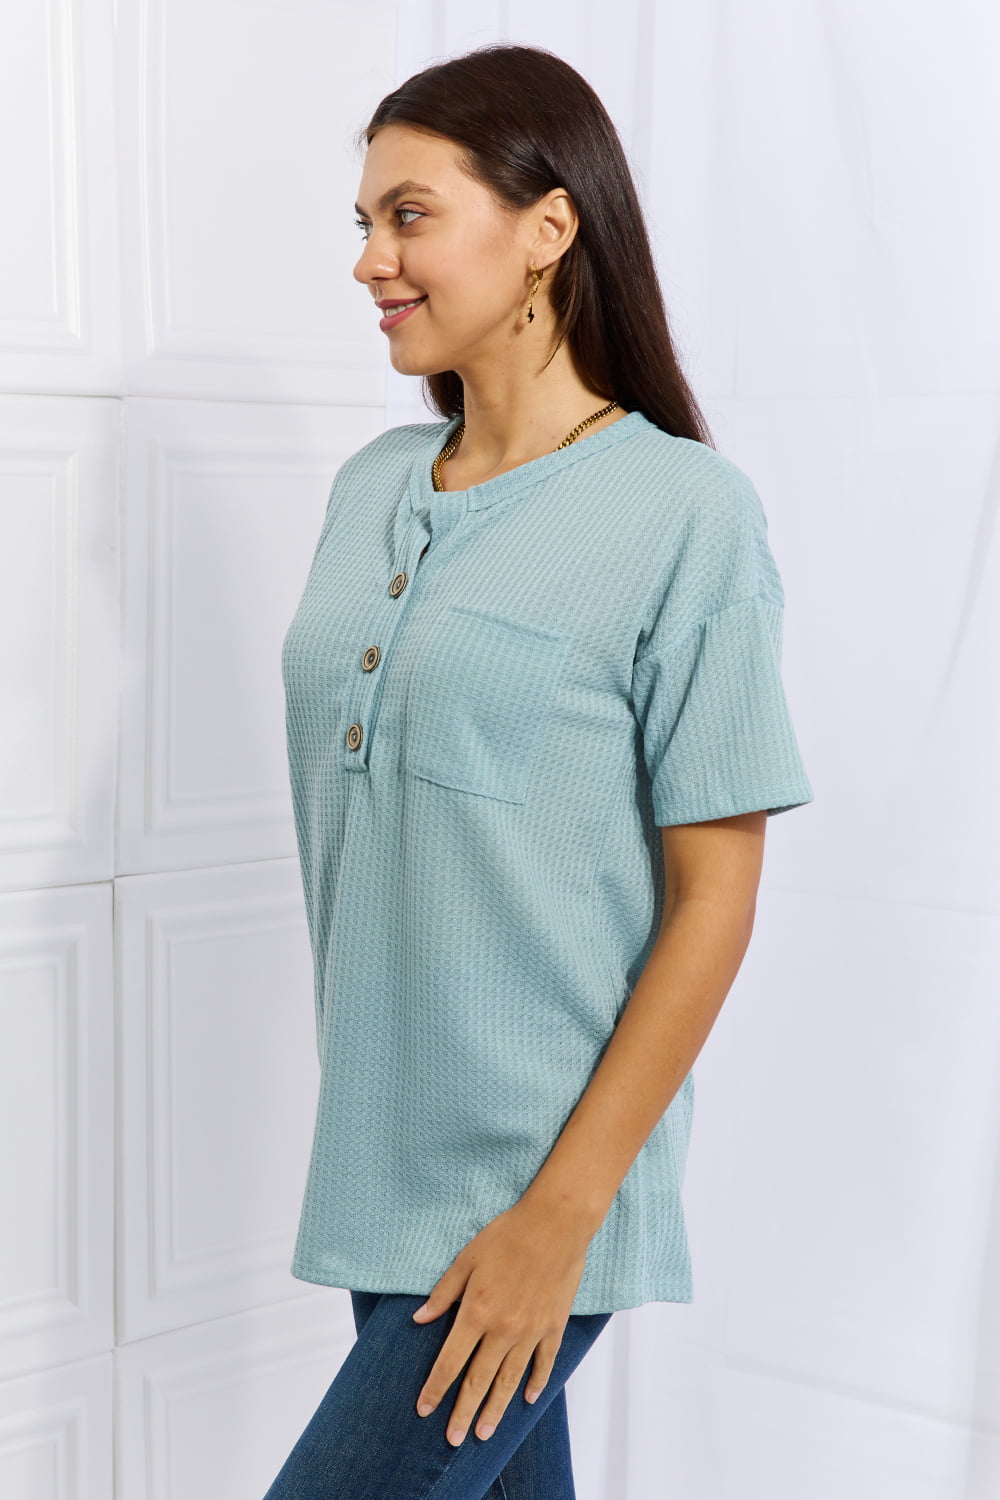 Heimish Made For You Full Size 1/4 Button Down Waffle Top in Blue - nailedmoms